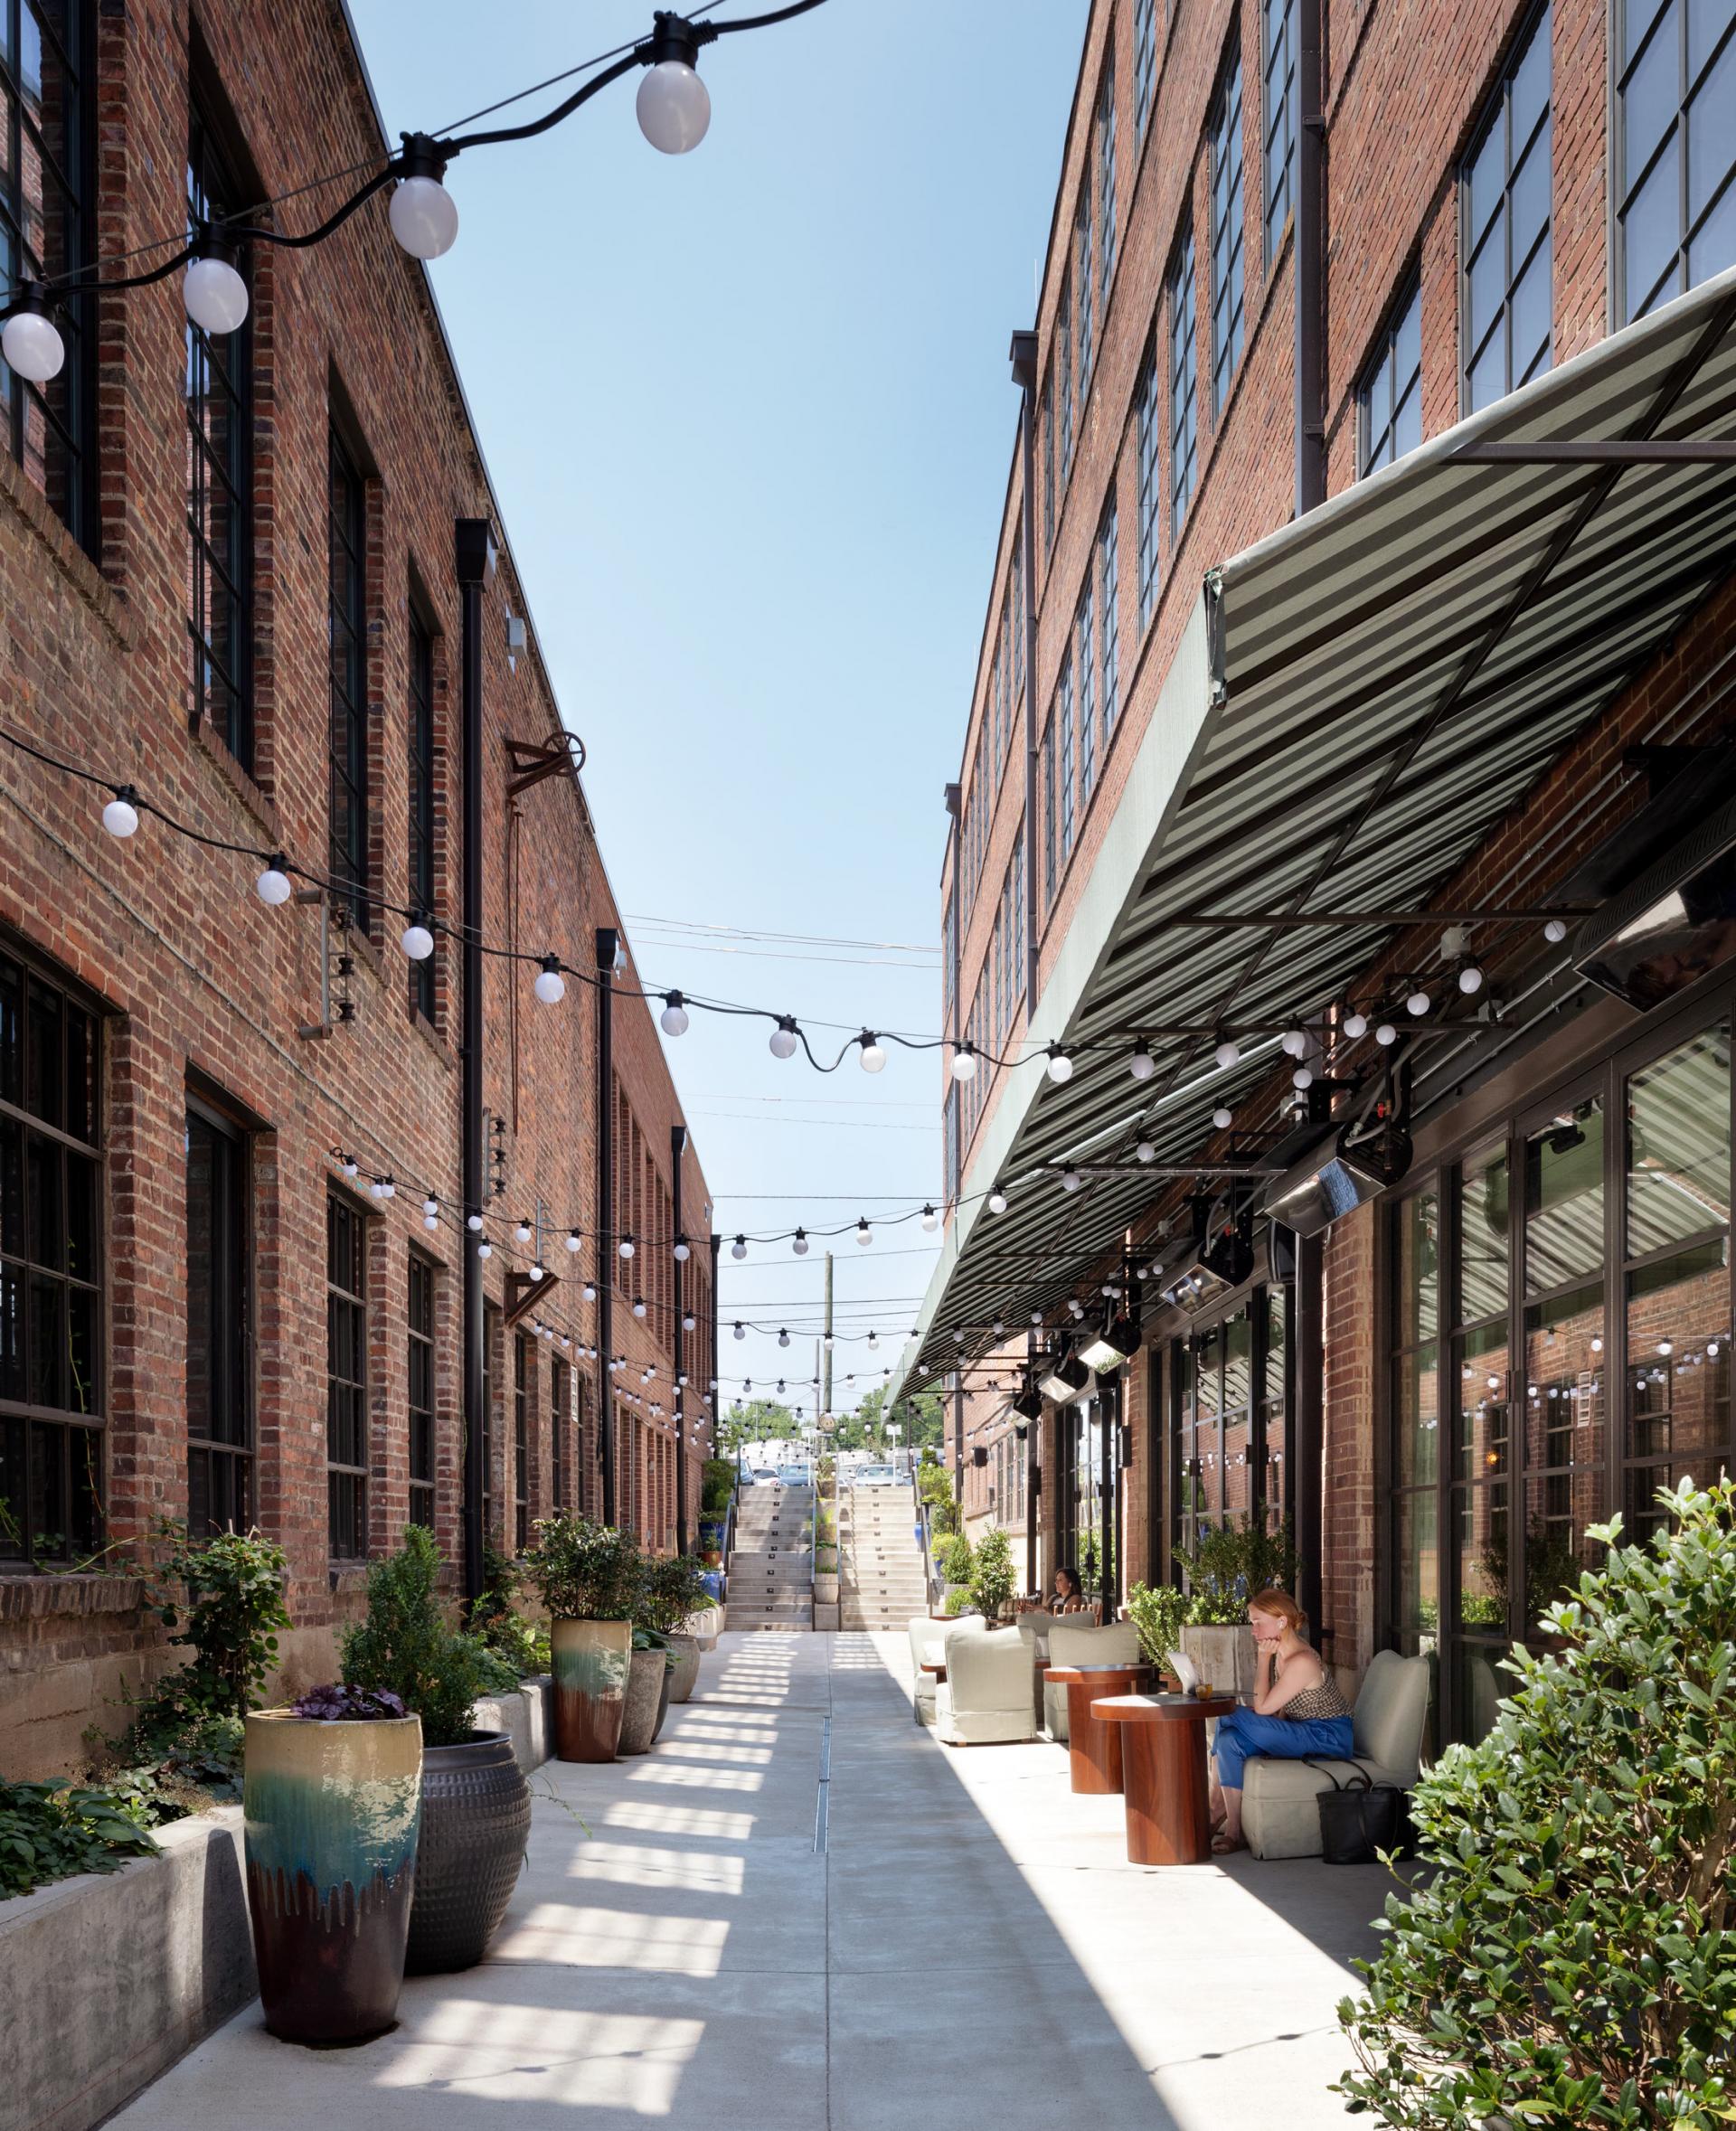 The adaptive reuse, renovation, and restoration of the historic buildings spanned more than five years. Steel grids from existing windows and original bricks were preserved, creating patterns new and old.